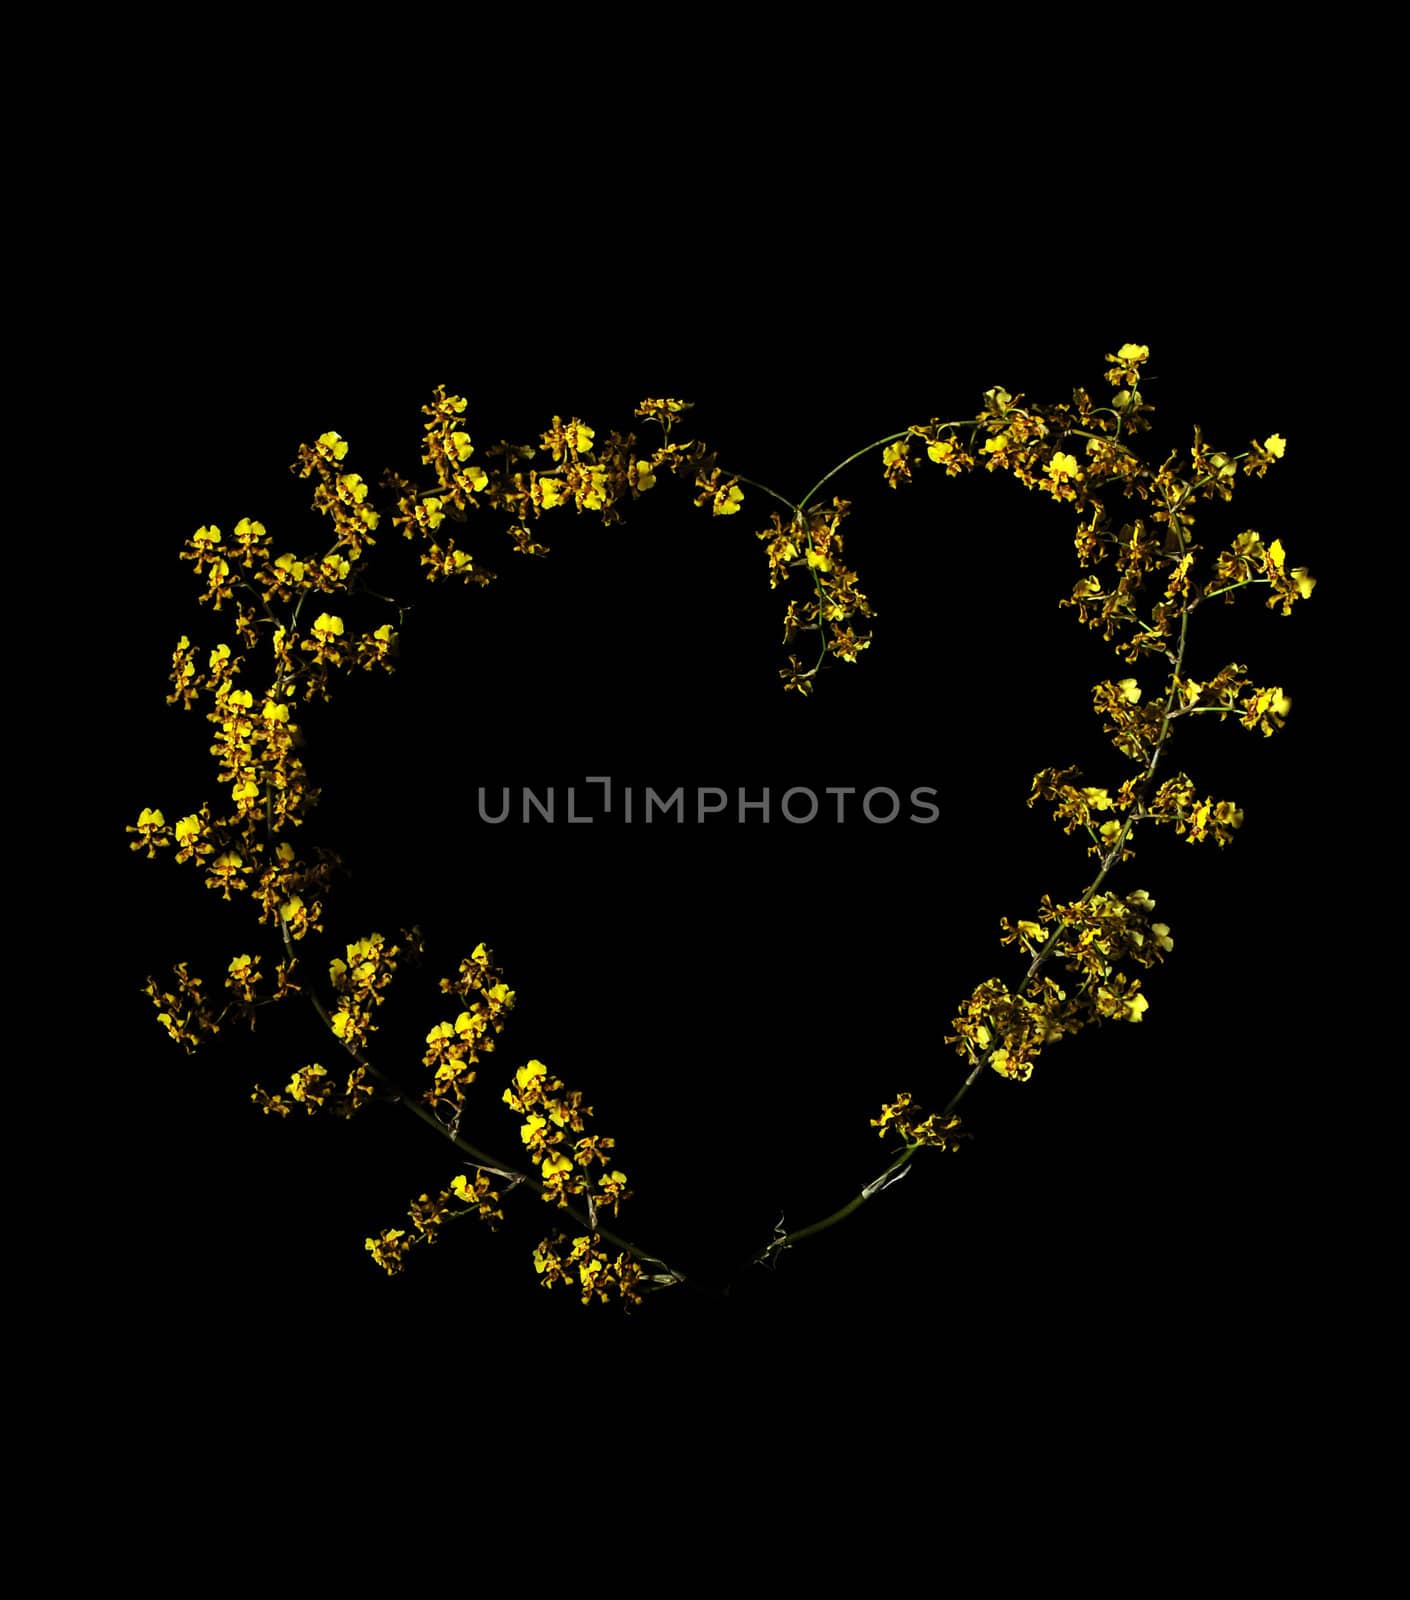 yellow orchid flowers in heart shape by ftlaudgirl